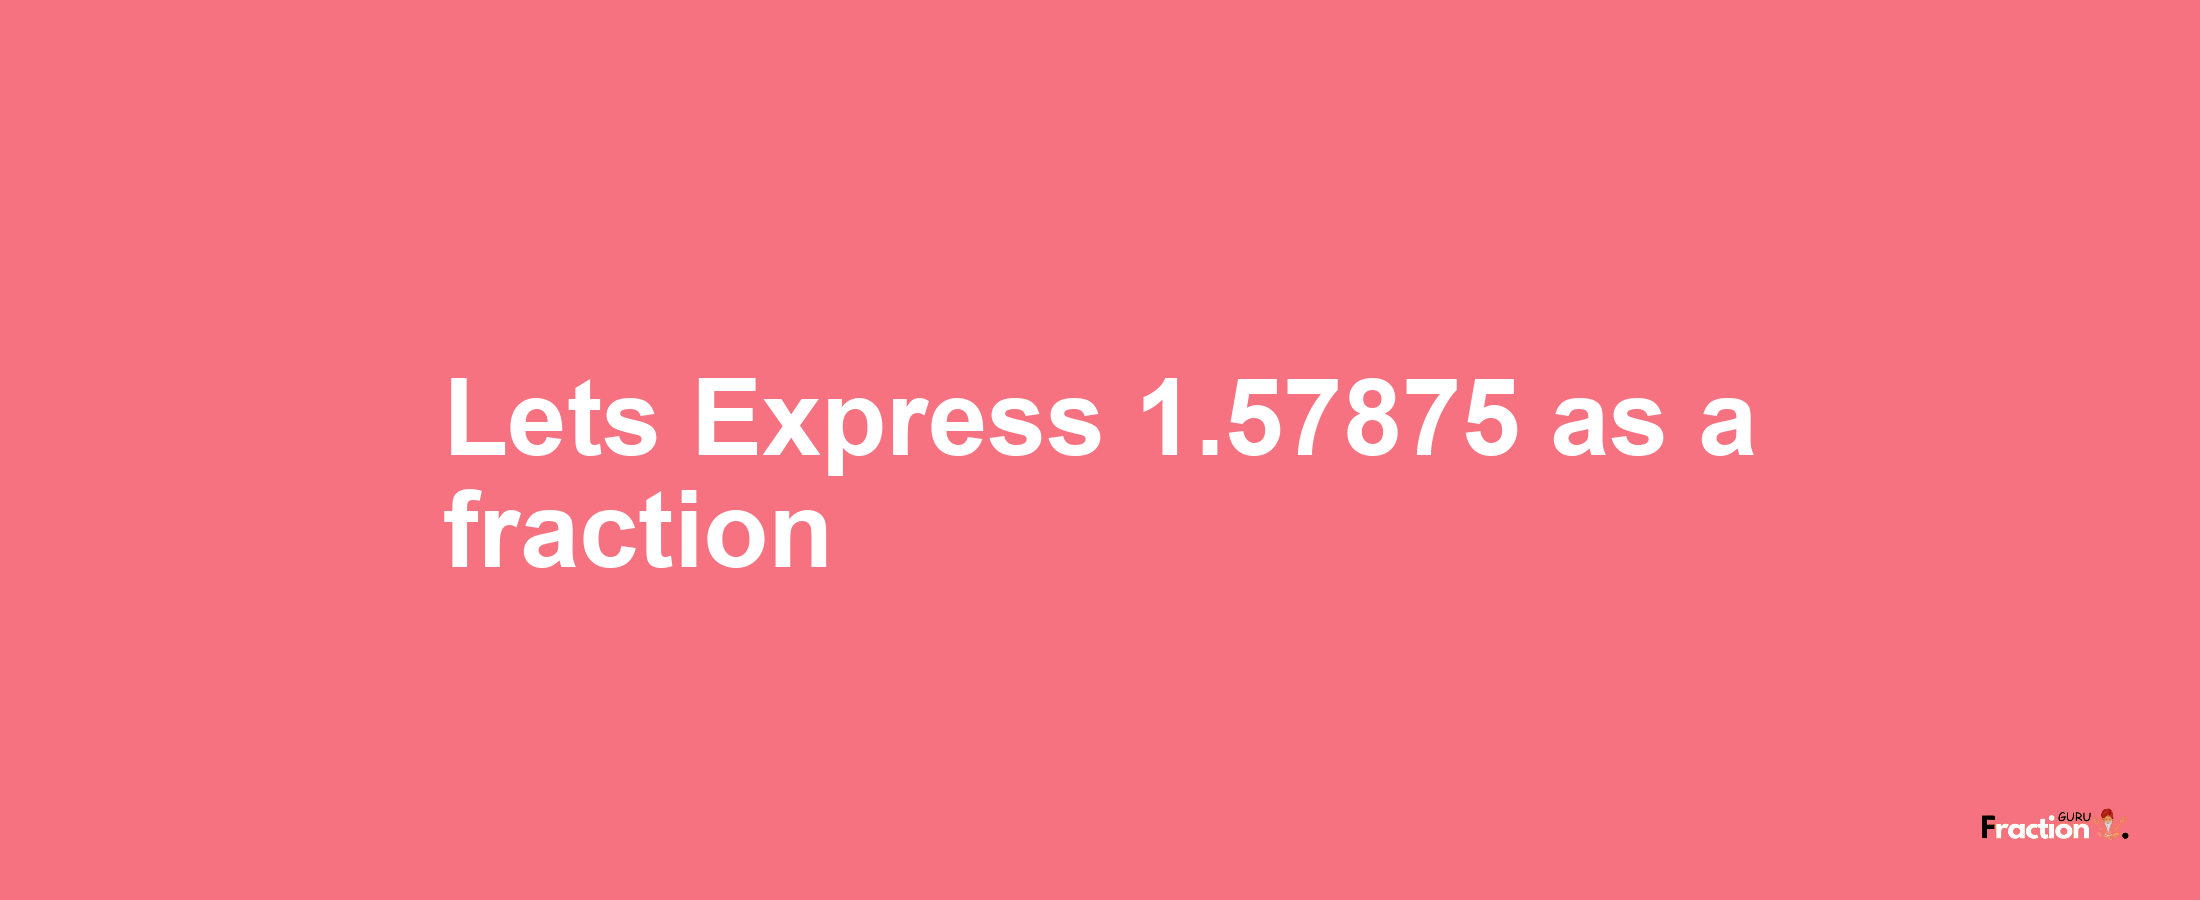 Lets Express 1.57875 as afraction